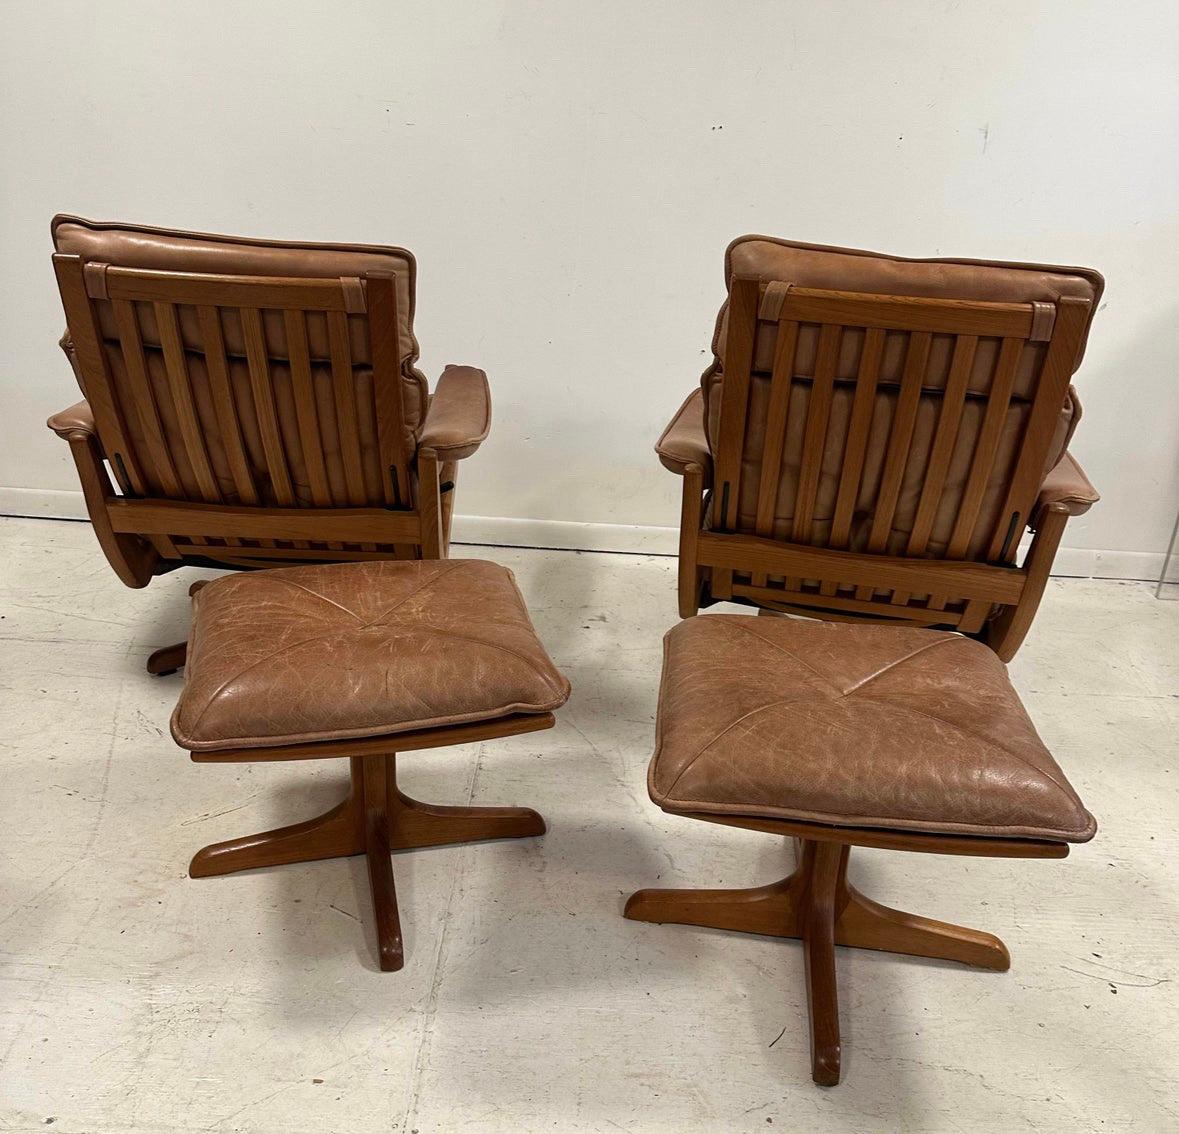 1970s soda galvino Denmark solid teak recliners with ottomans  For Sale 2